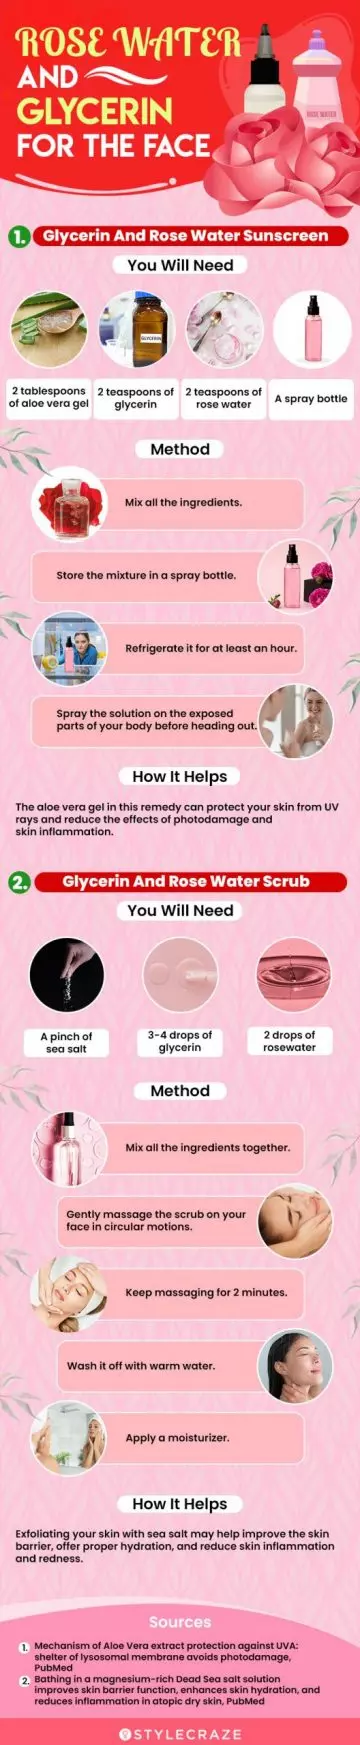 rose water and glycerin for the face (infographic)